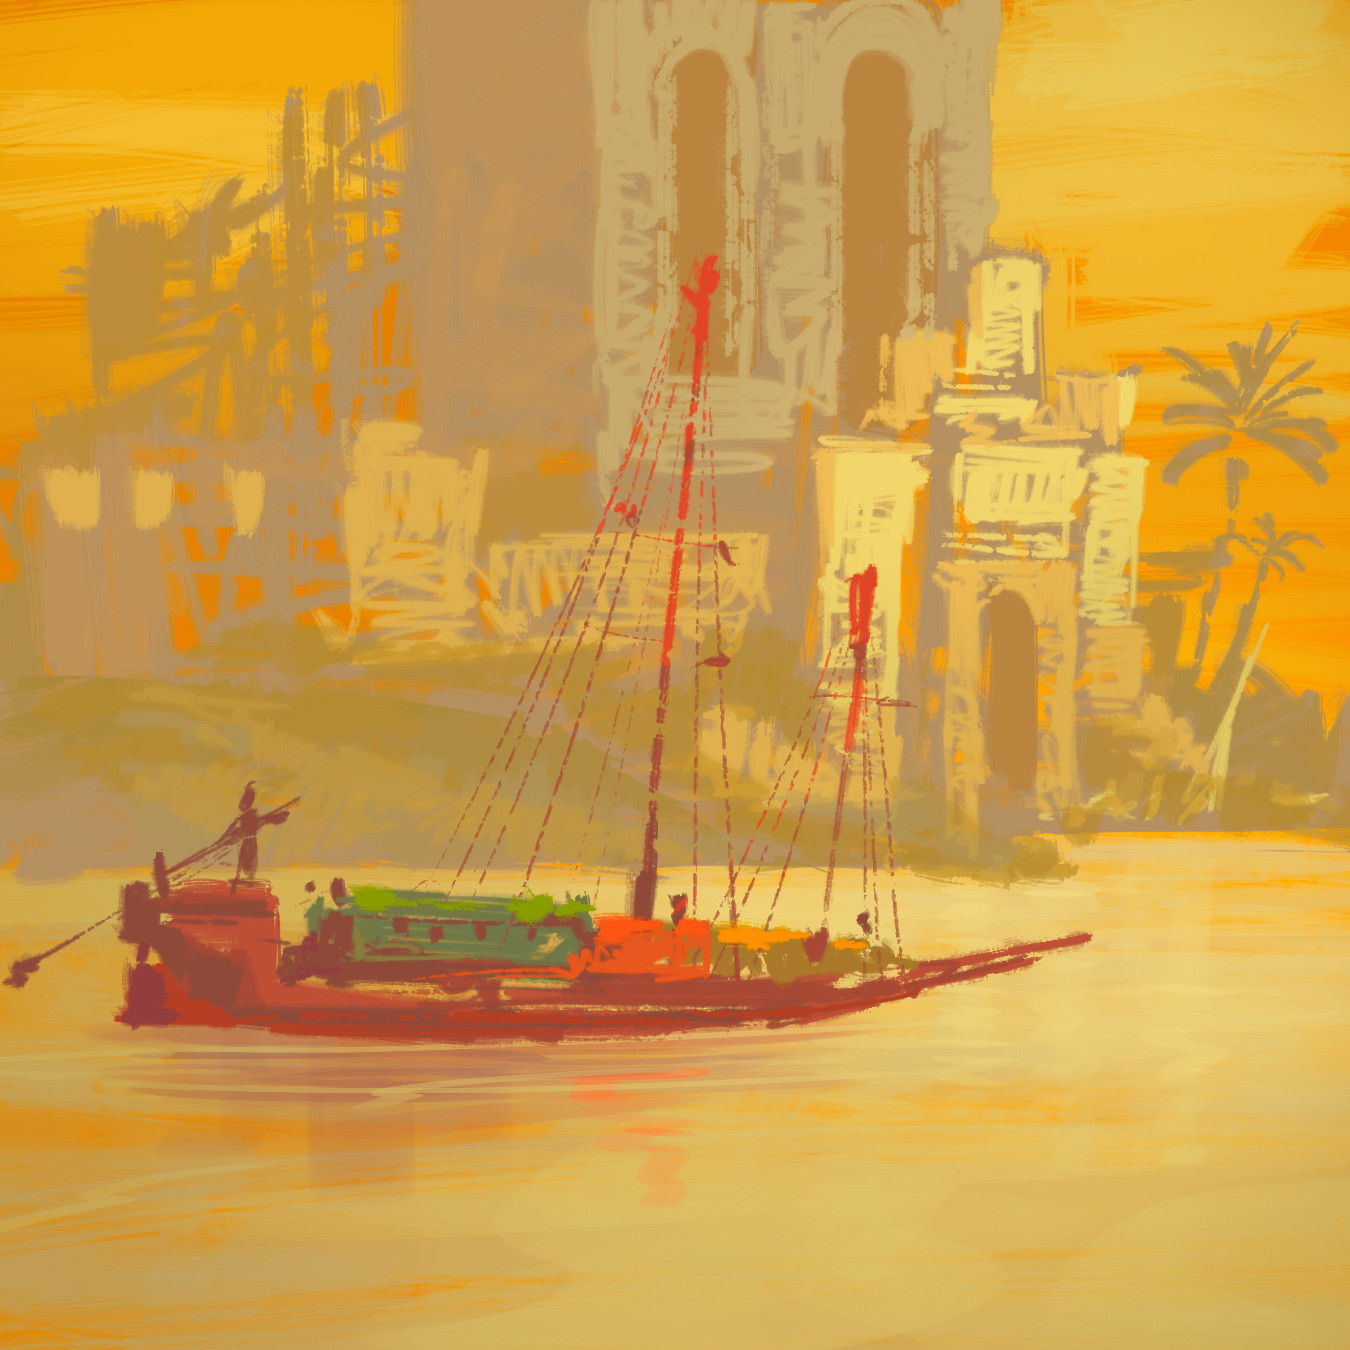 Along the Nile- pushing the color ideas